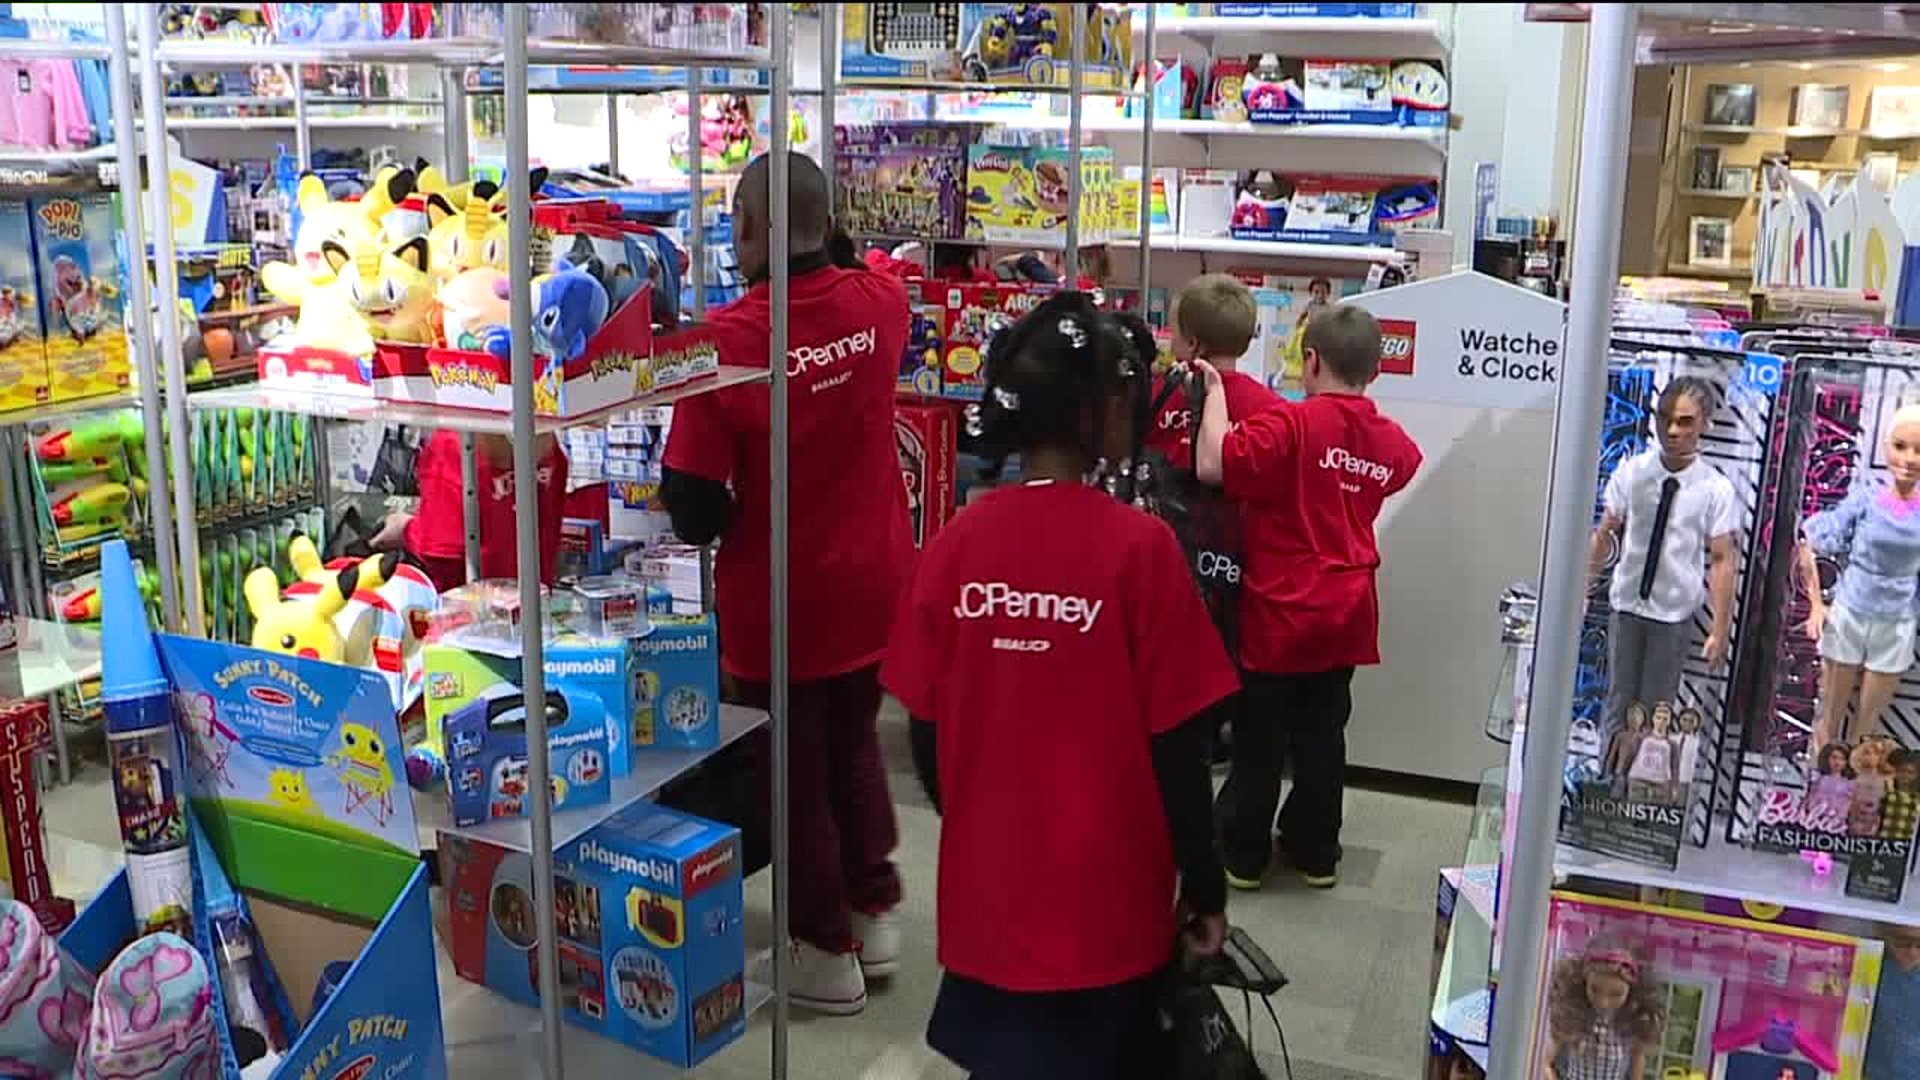 Kids from Boys and Girls Clubs Treated to Shopping Spree